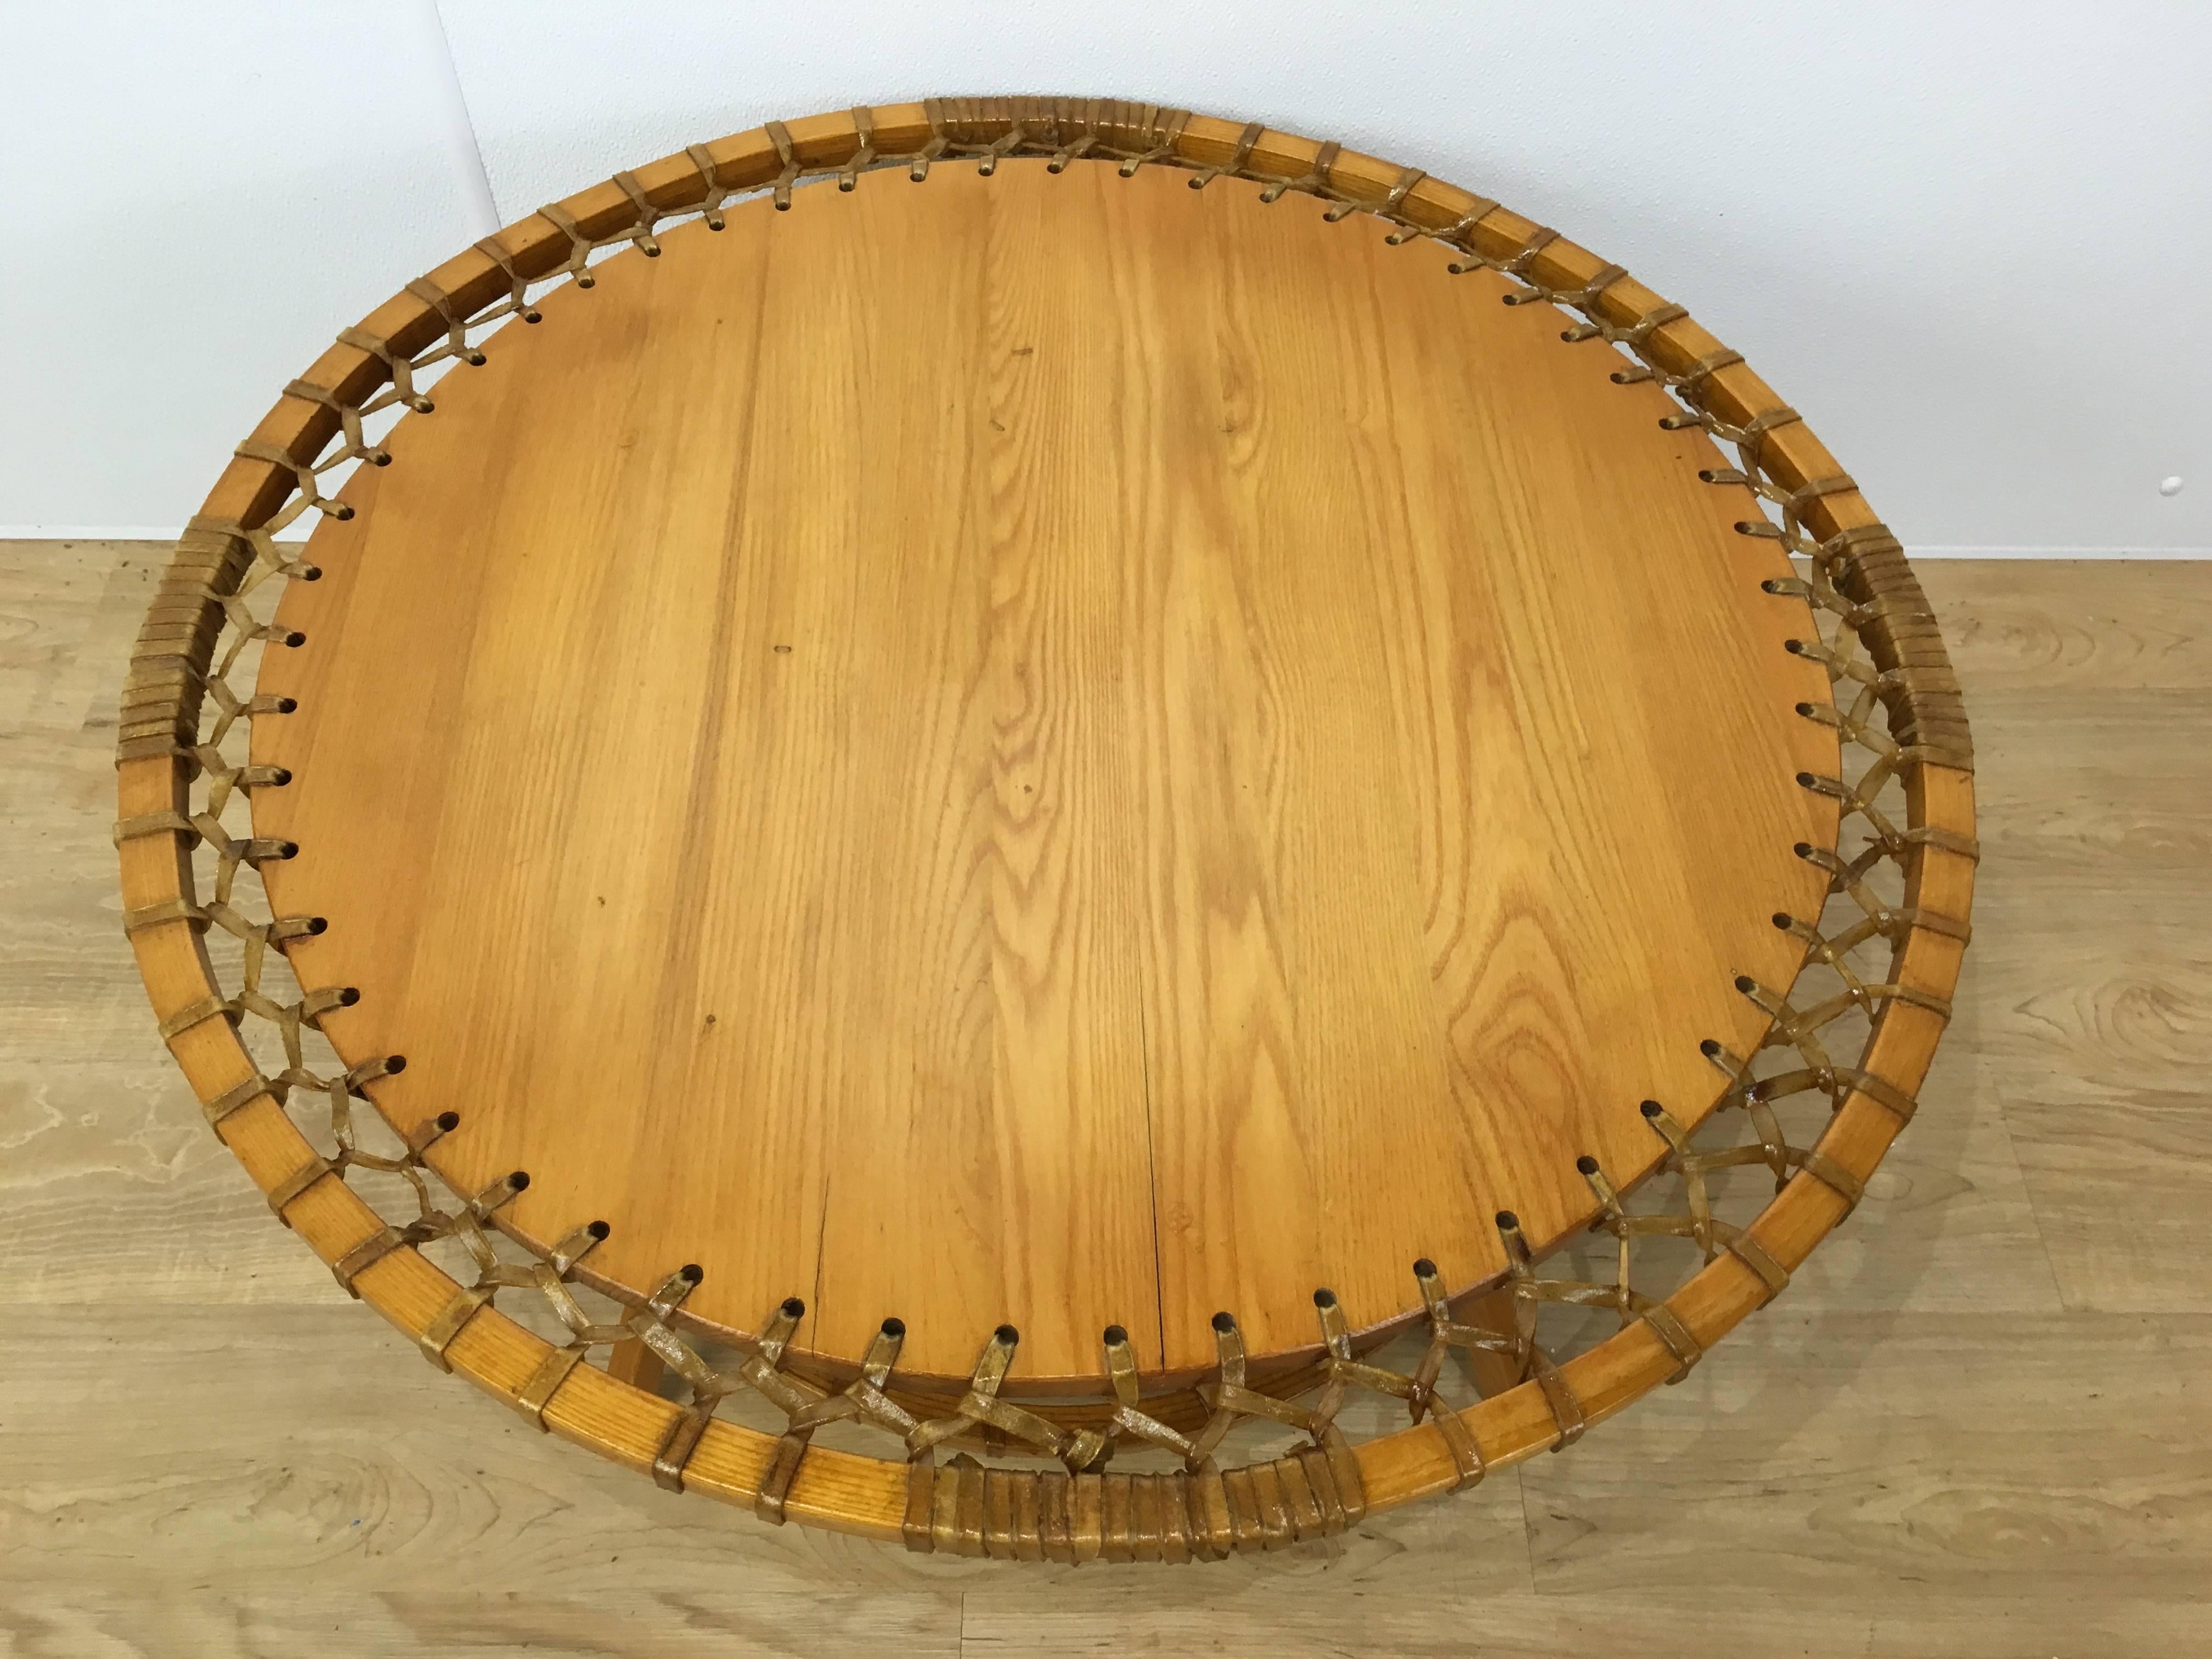 Circular oak Adirondack style coffee table with woven raw-hide detail and lower shelf.
Near pair available, please see fifth detail photo. Minor variations in wood top but present well together. Please contact us for further details.